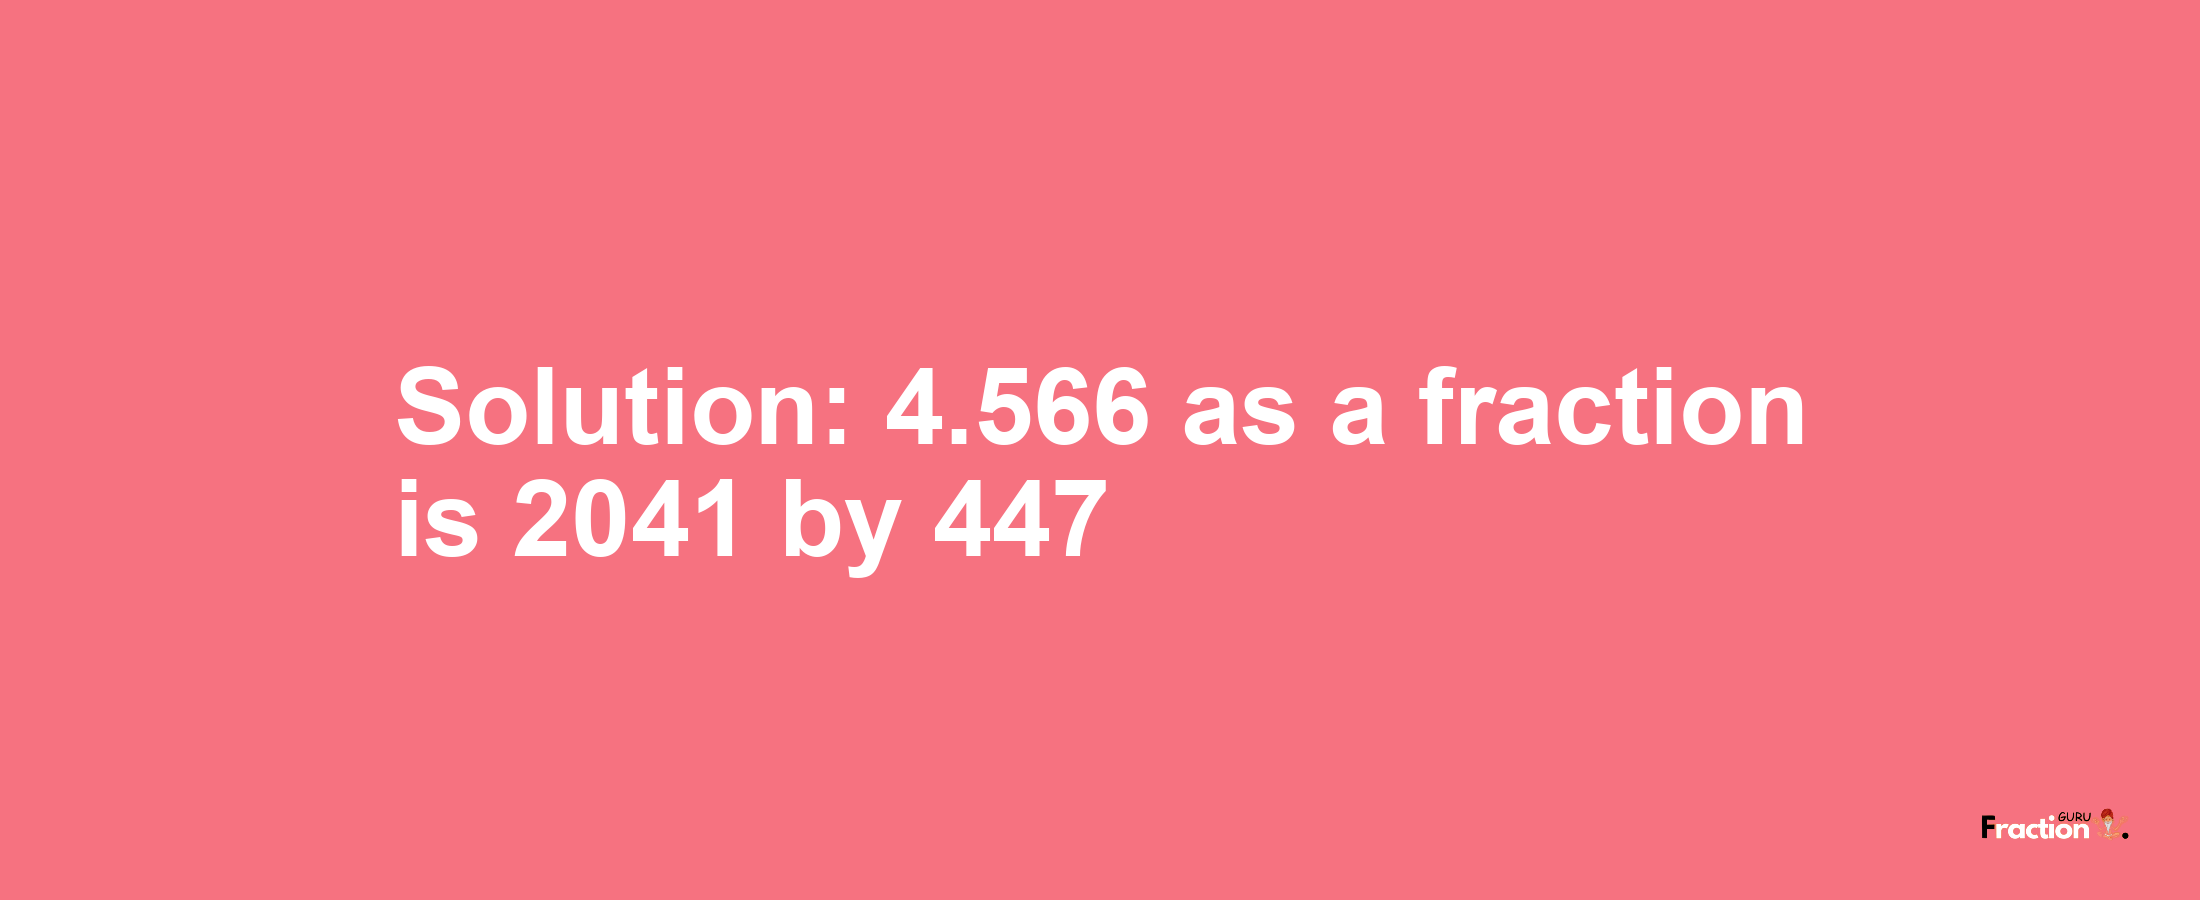 Solution:4.566 as a fraction is 2041/447